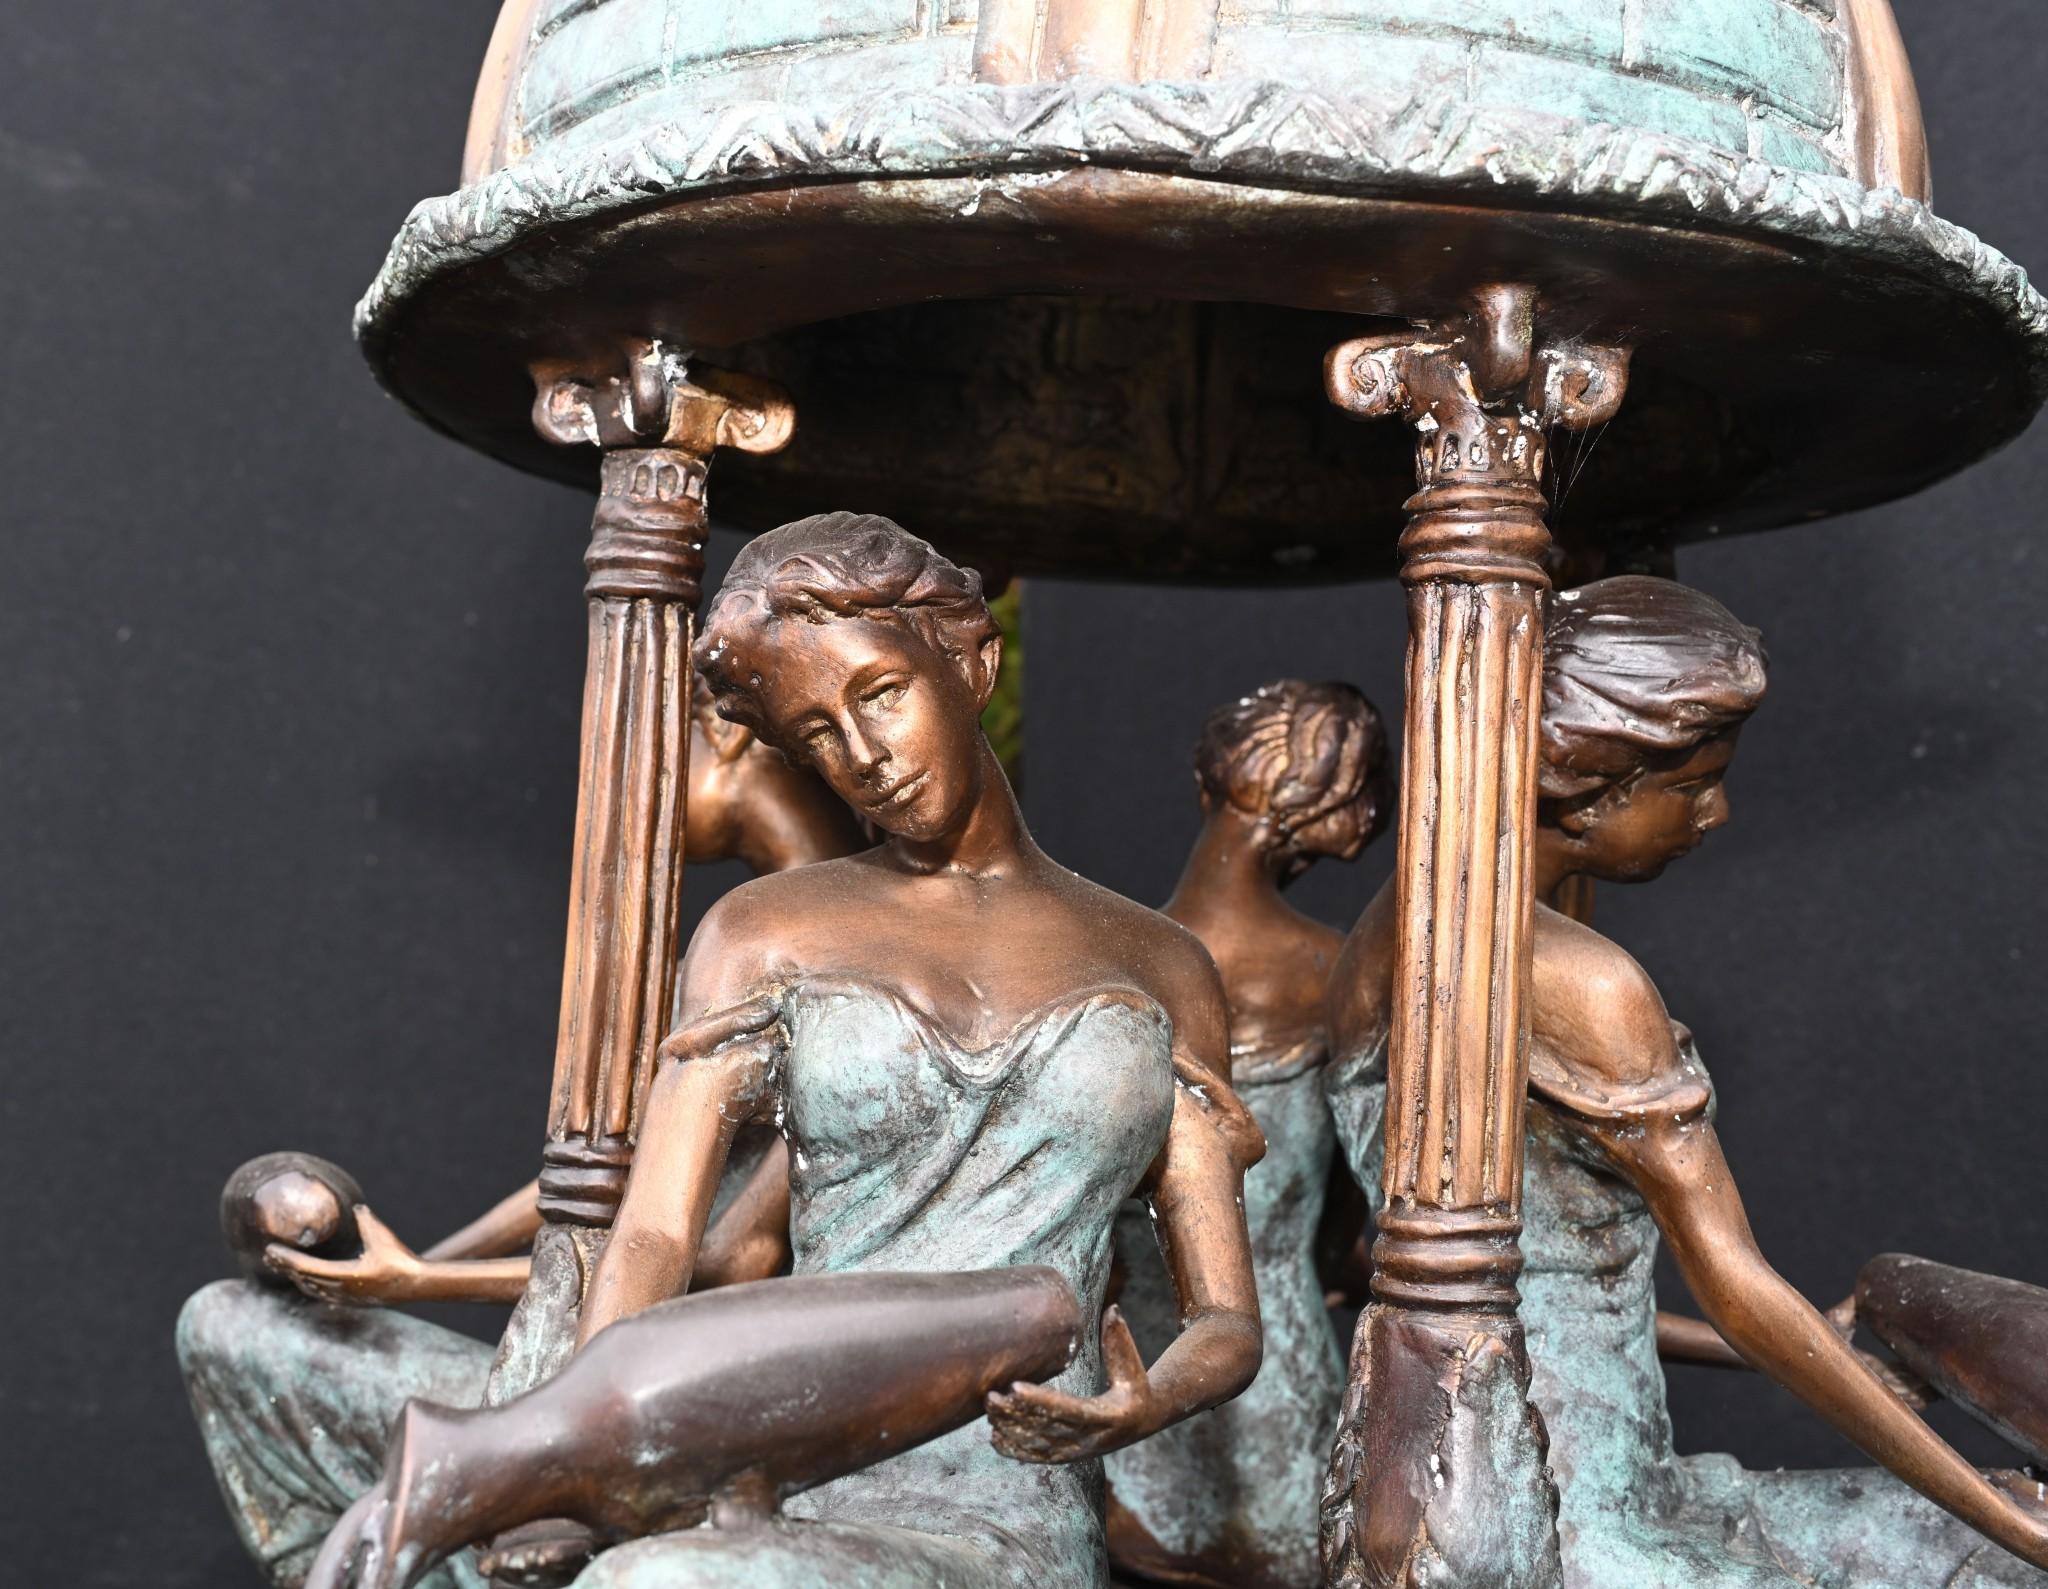 Delightful large bronze Italian fountain adorned with maidens and muses
The piece is nearly 8 feet tall - 238 CM so good size
The central column is supported by the four toga clad classical maidens
Then we have the main bowl of the fountain above